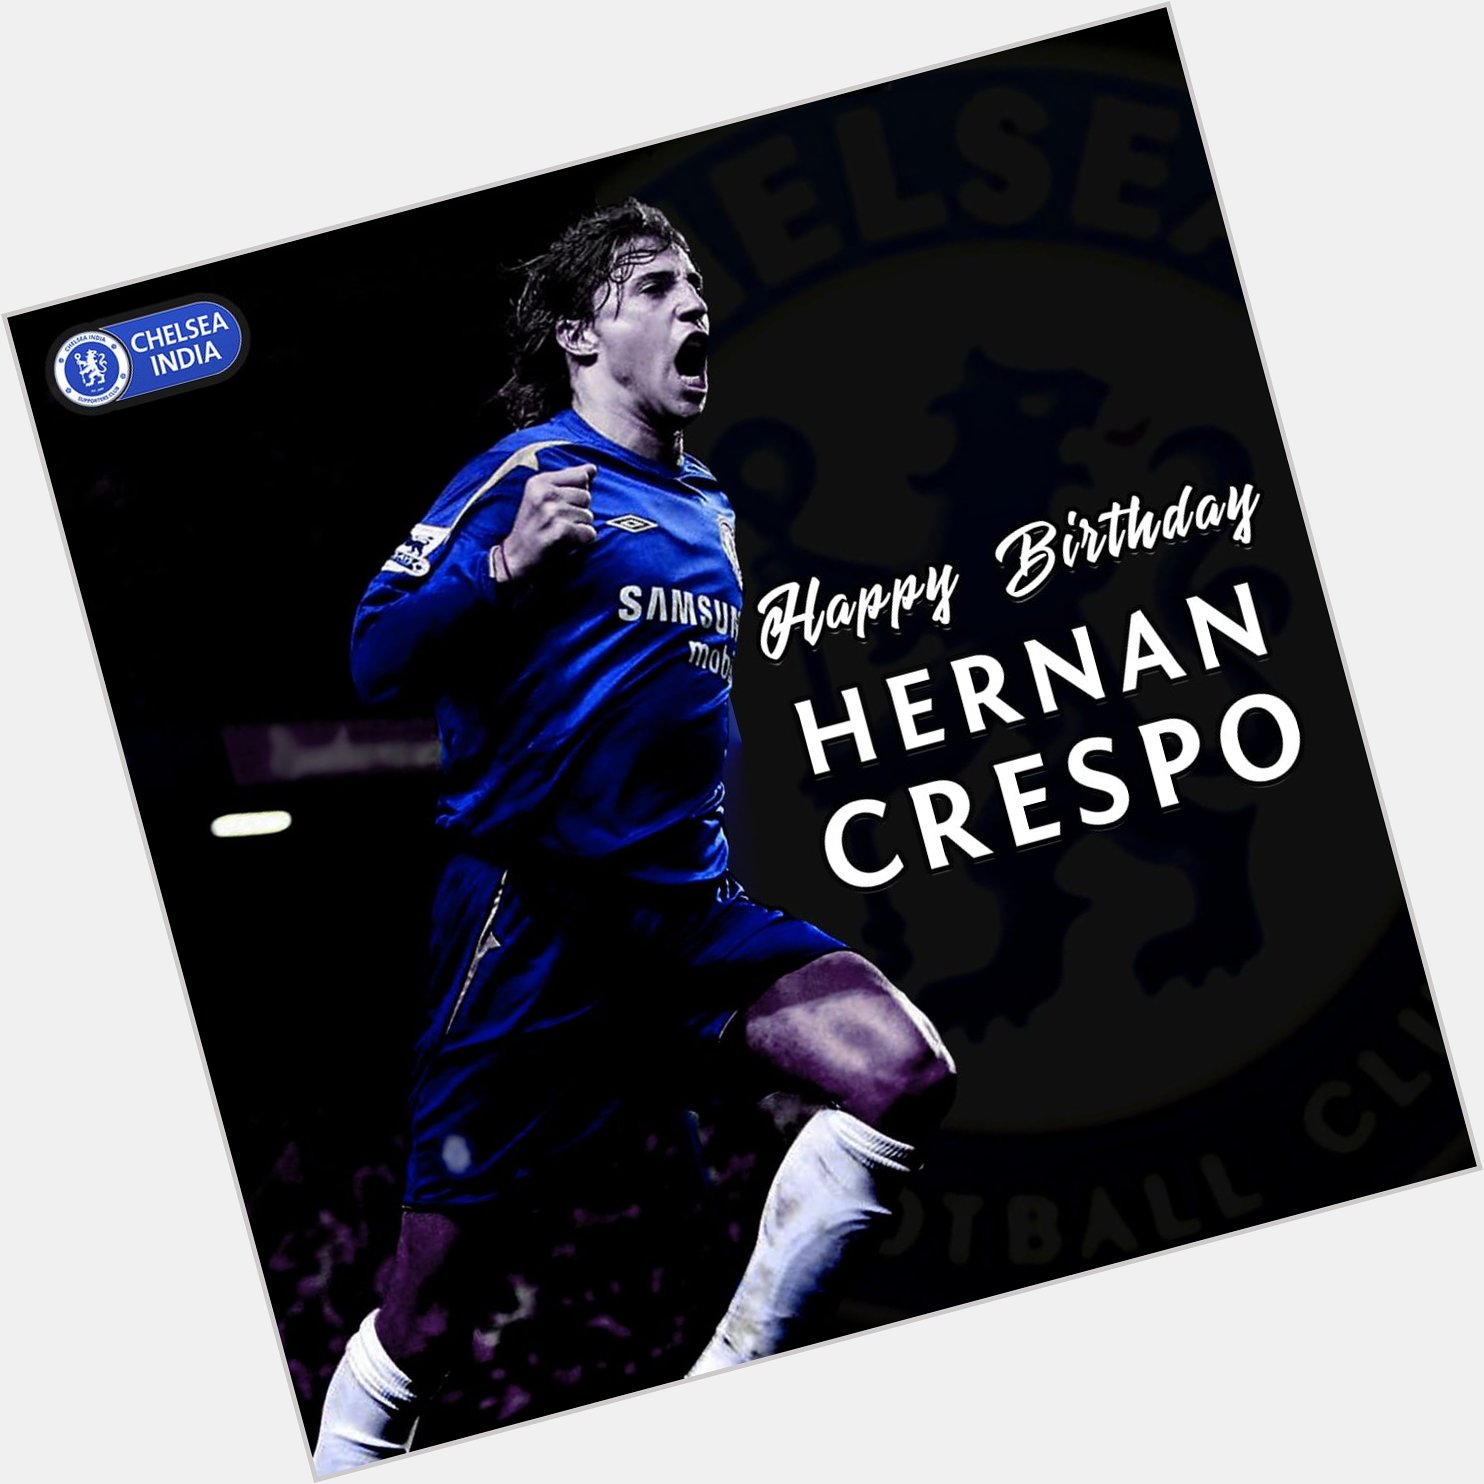 Wishing a very Happy Birthday to our former striker and winner, Hernan  